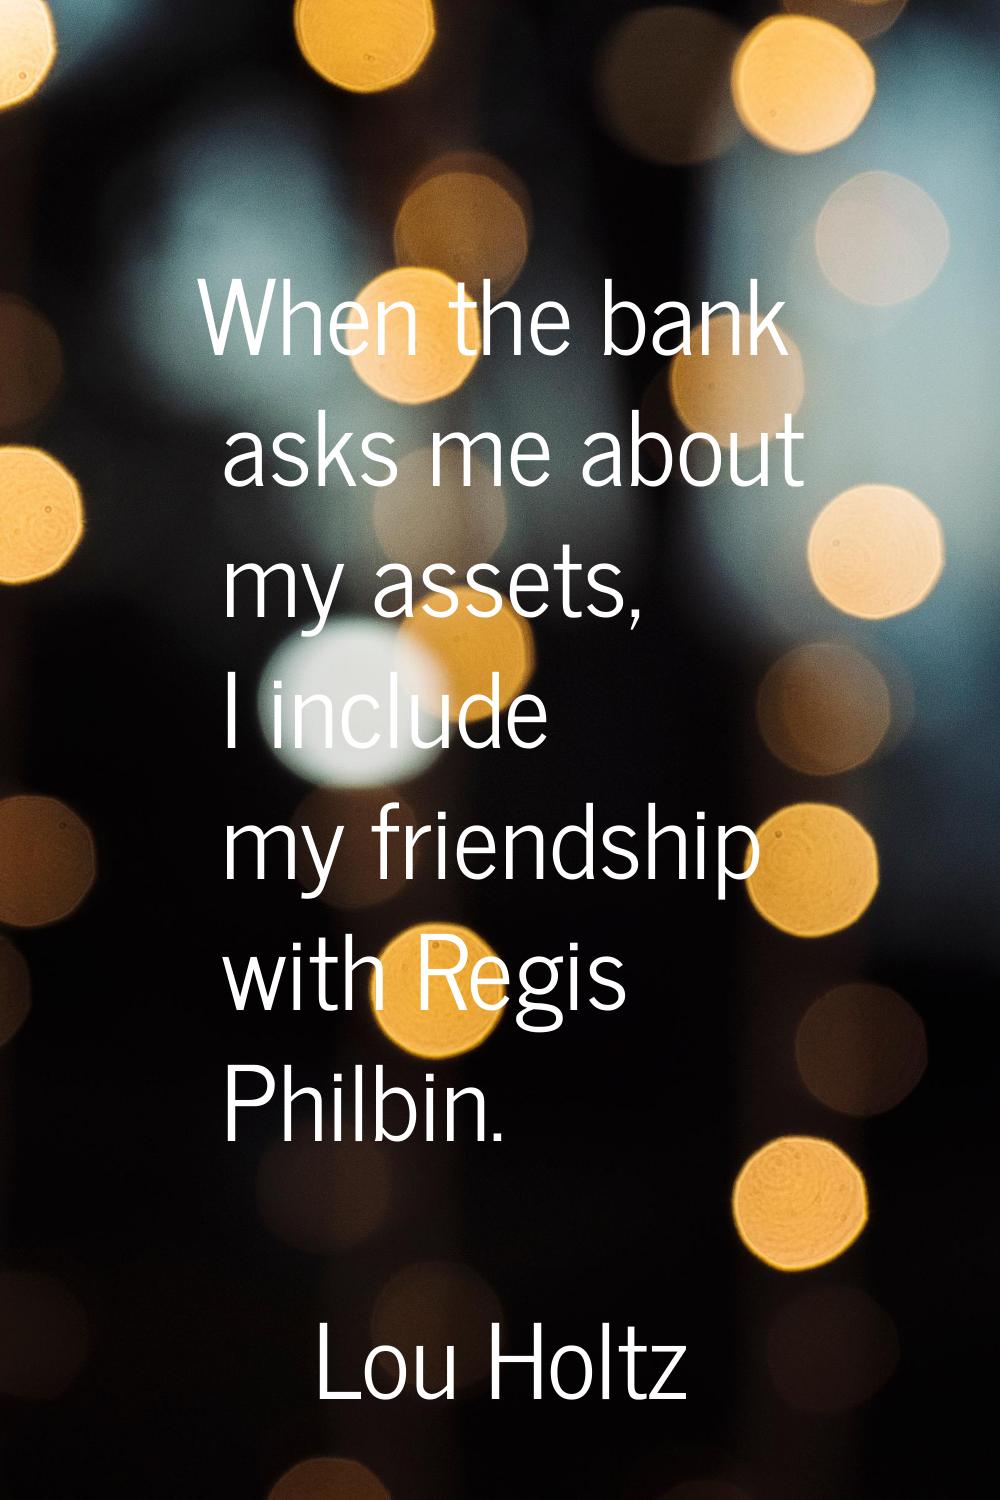 When the bank asks me about my assets, I include my friendship with Regis Philbin.